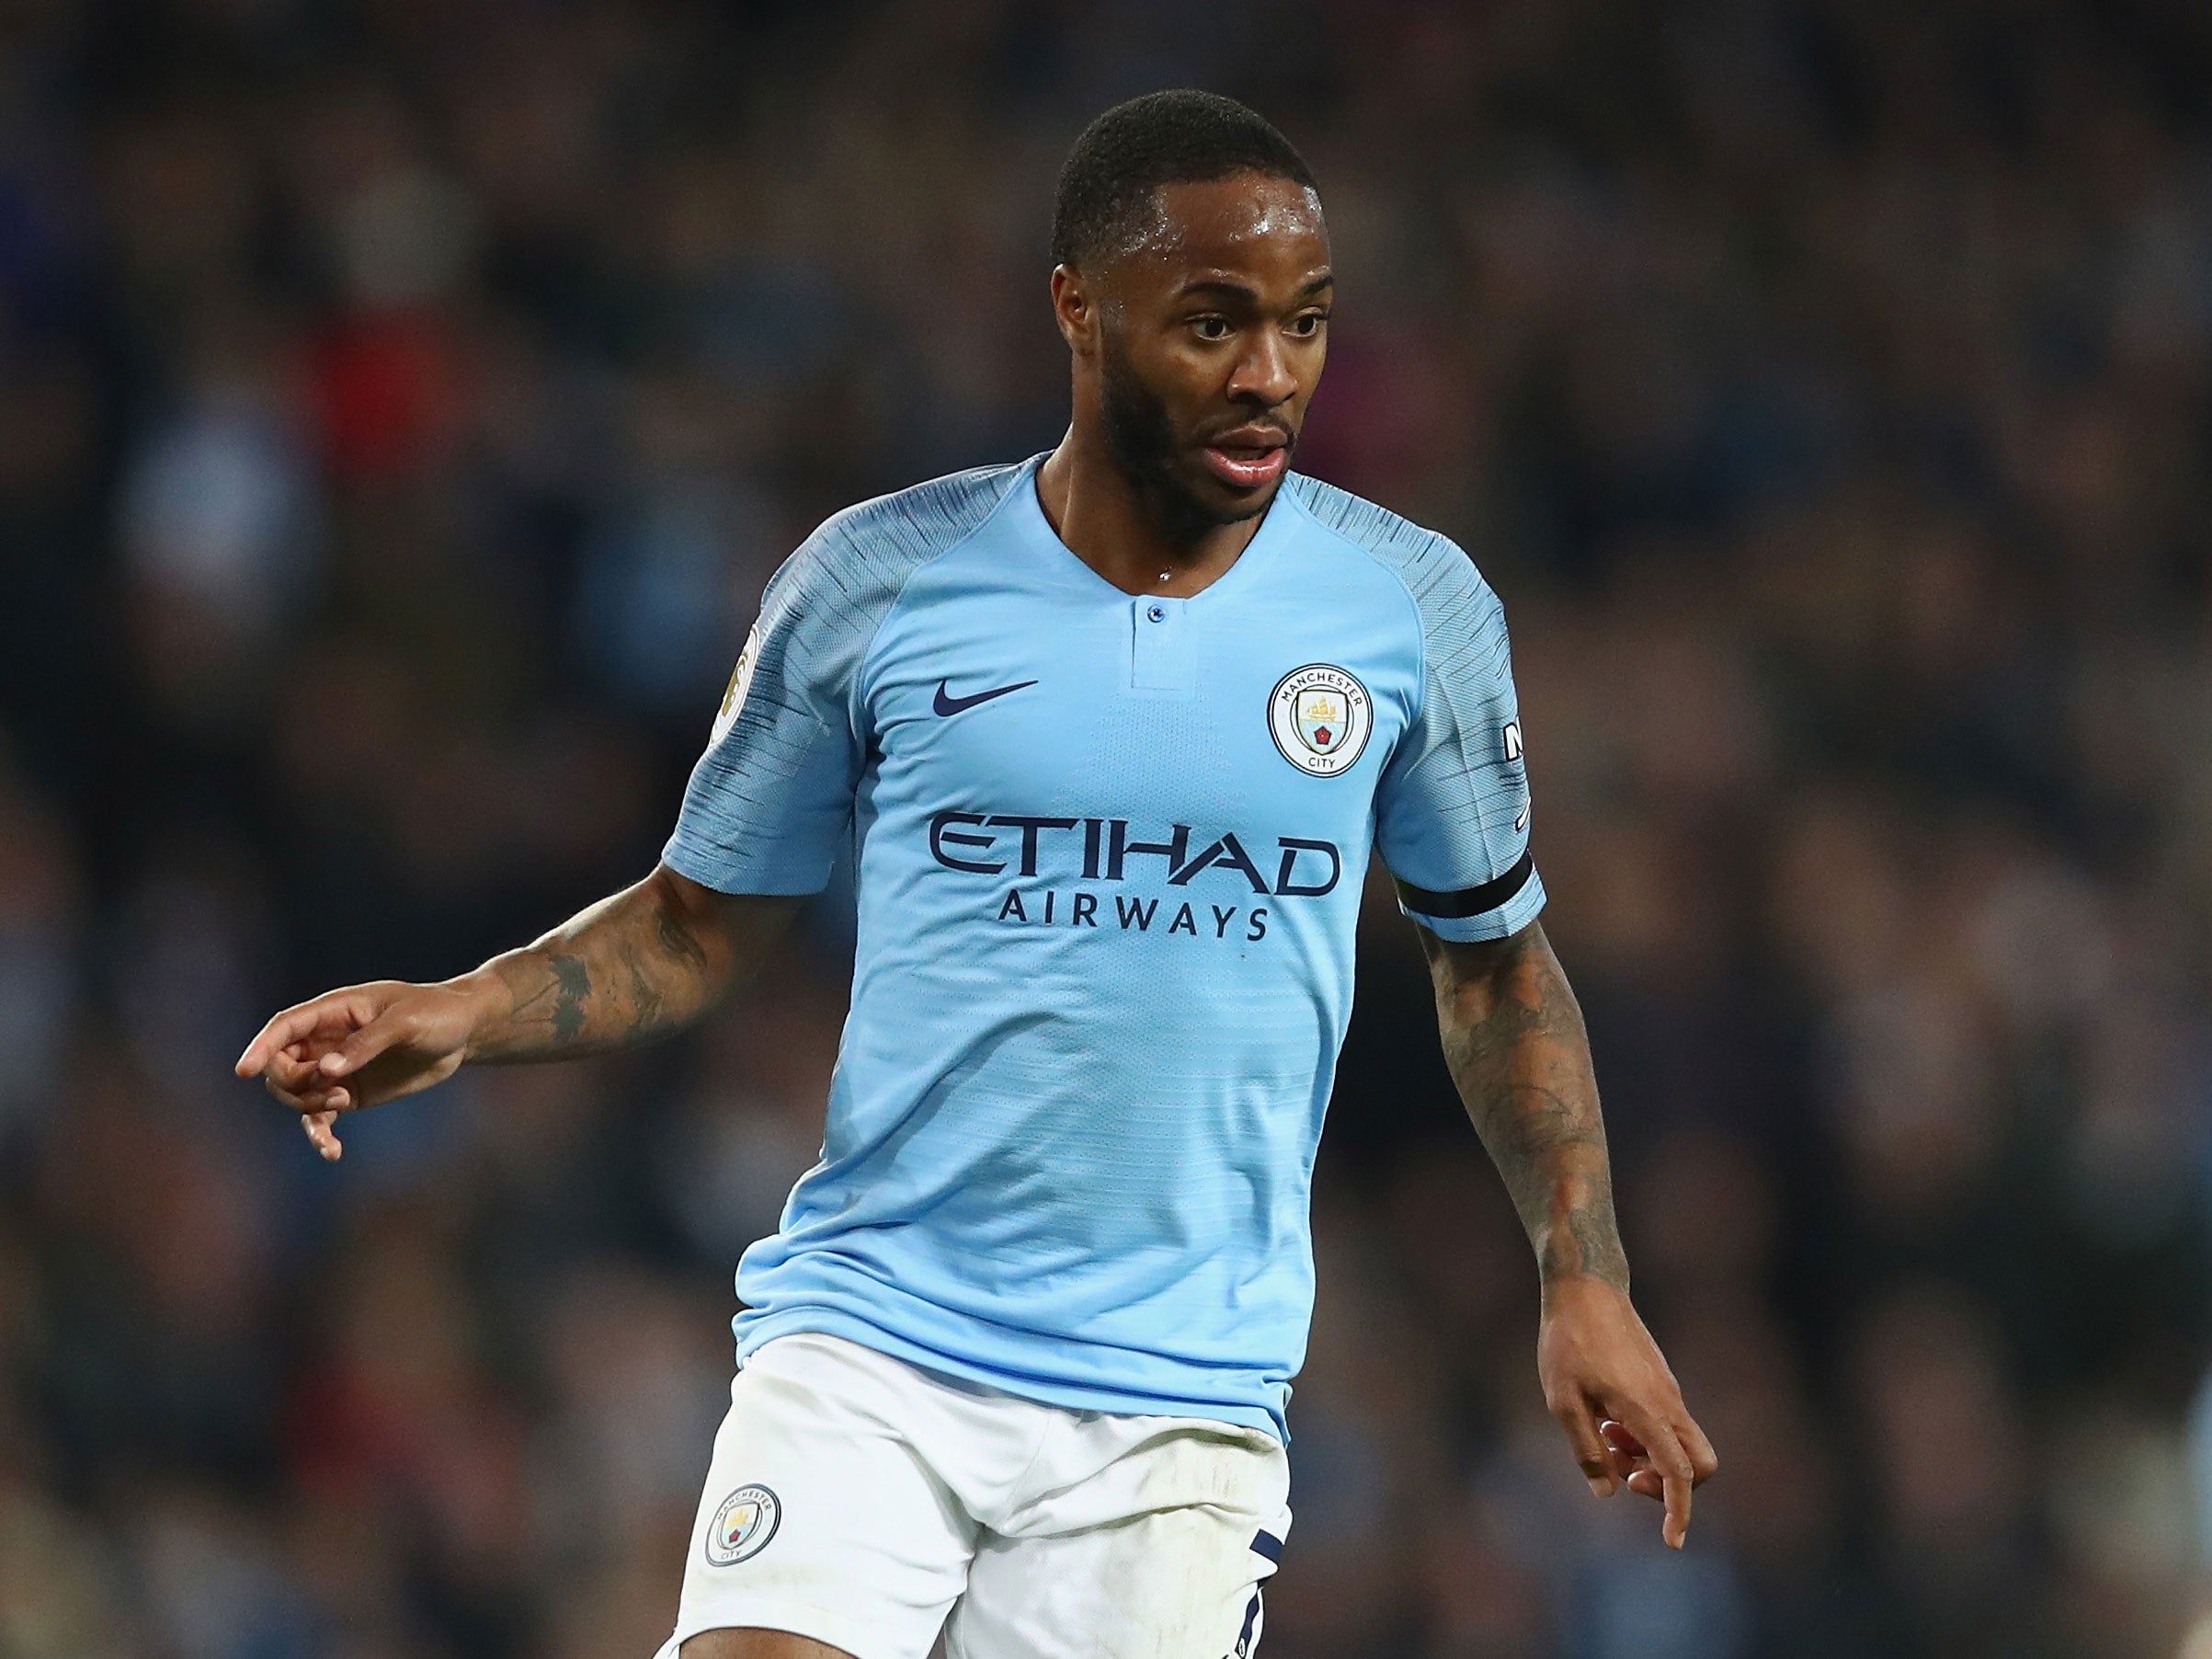 Jurgen Klopp has hailed Raheem Sterling's reaction to the alleged abuse as 'brilliant'